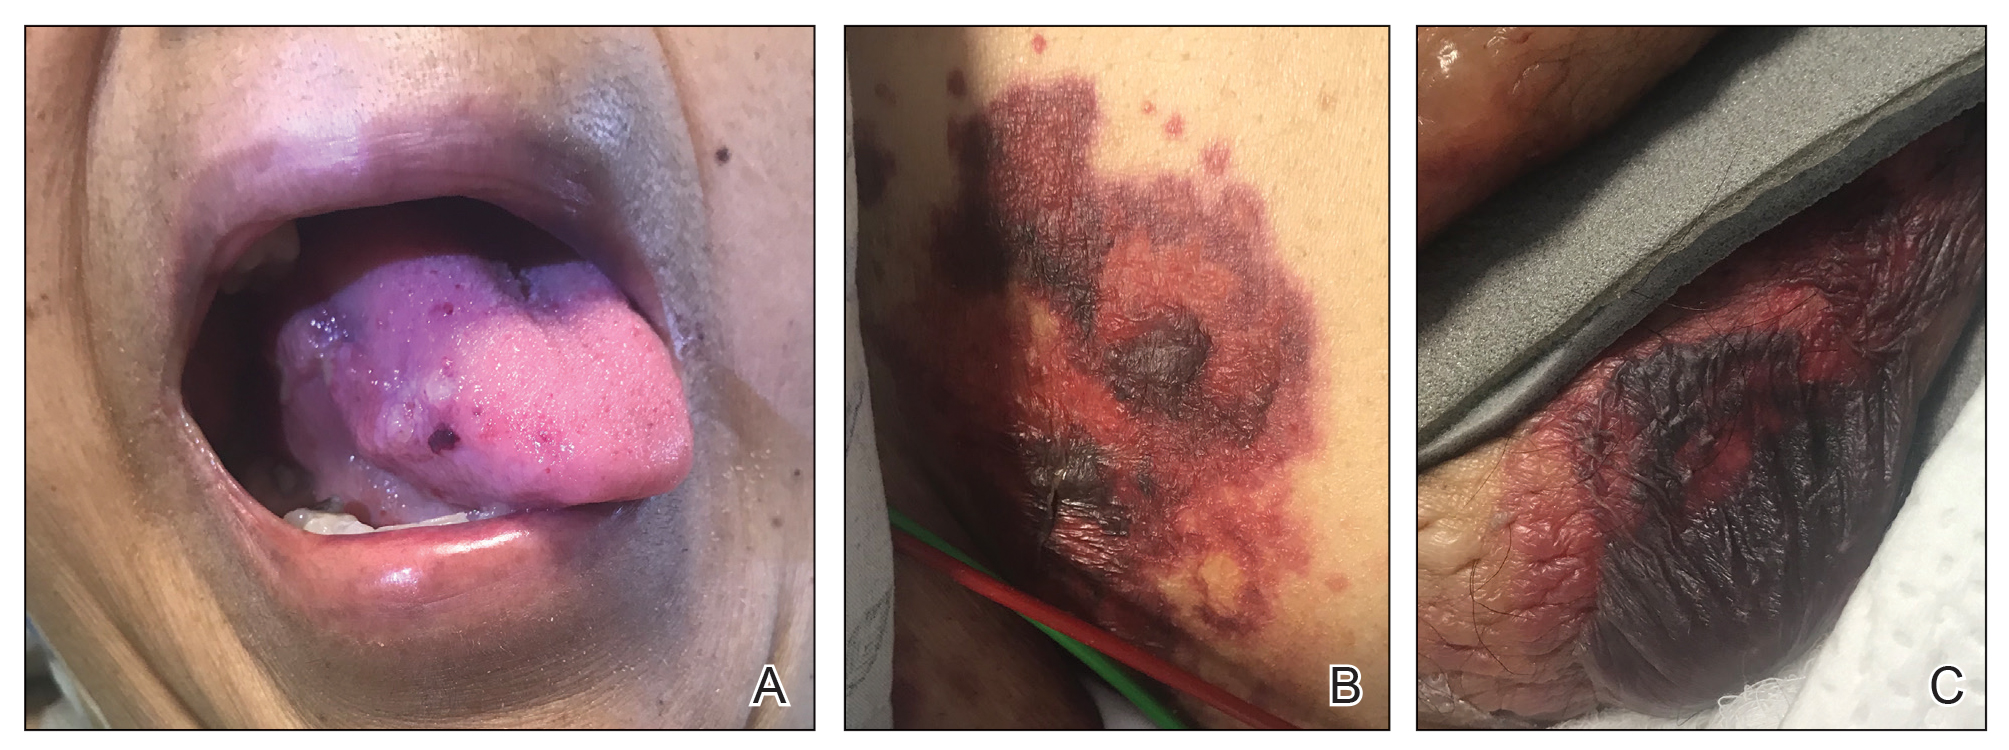 FIGURE 2. Bullous amyloidosis. A, Localized hemorrhagic bulla on the lateral tongue. B and C, Large hemorrhagic bullae on the groin. 